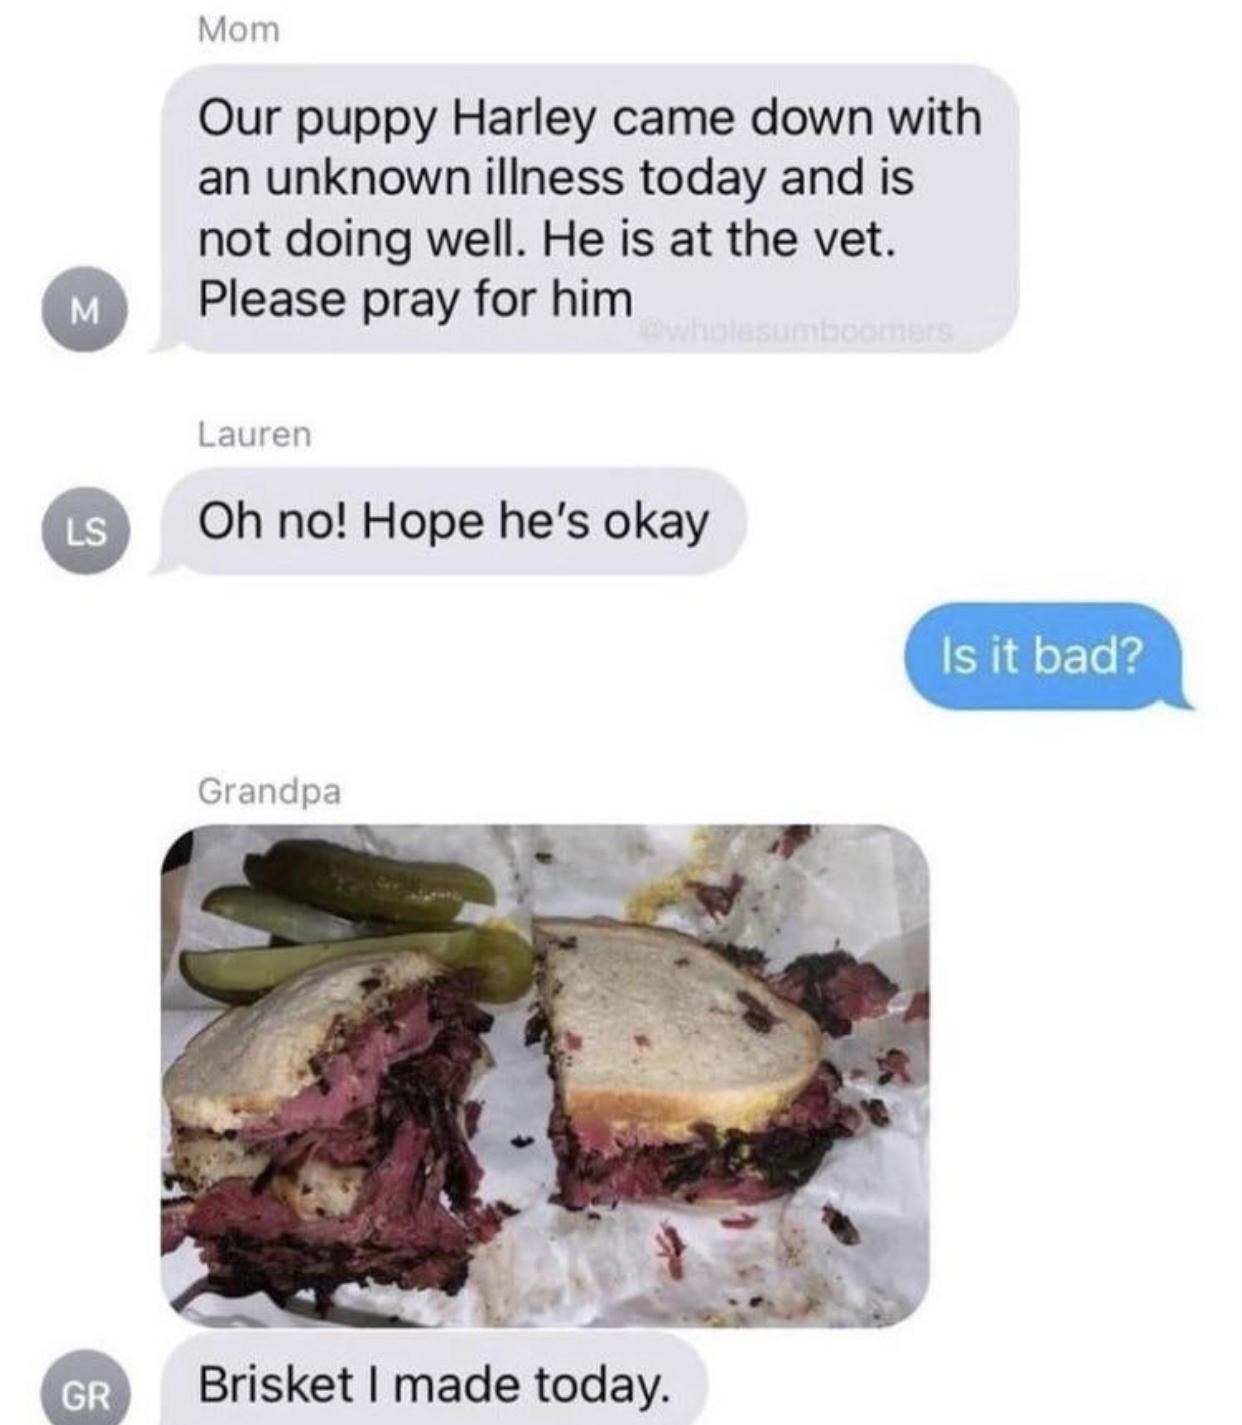 grandpa responding to an ill pet announcement with a pic of brisket